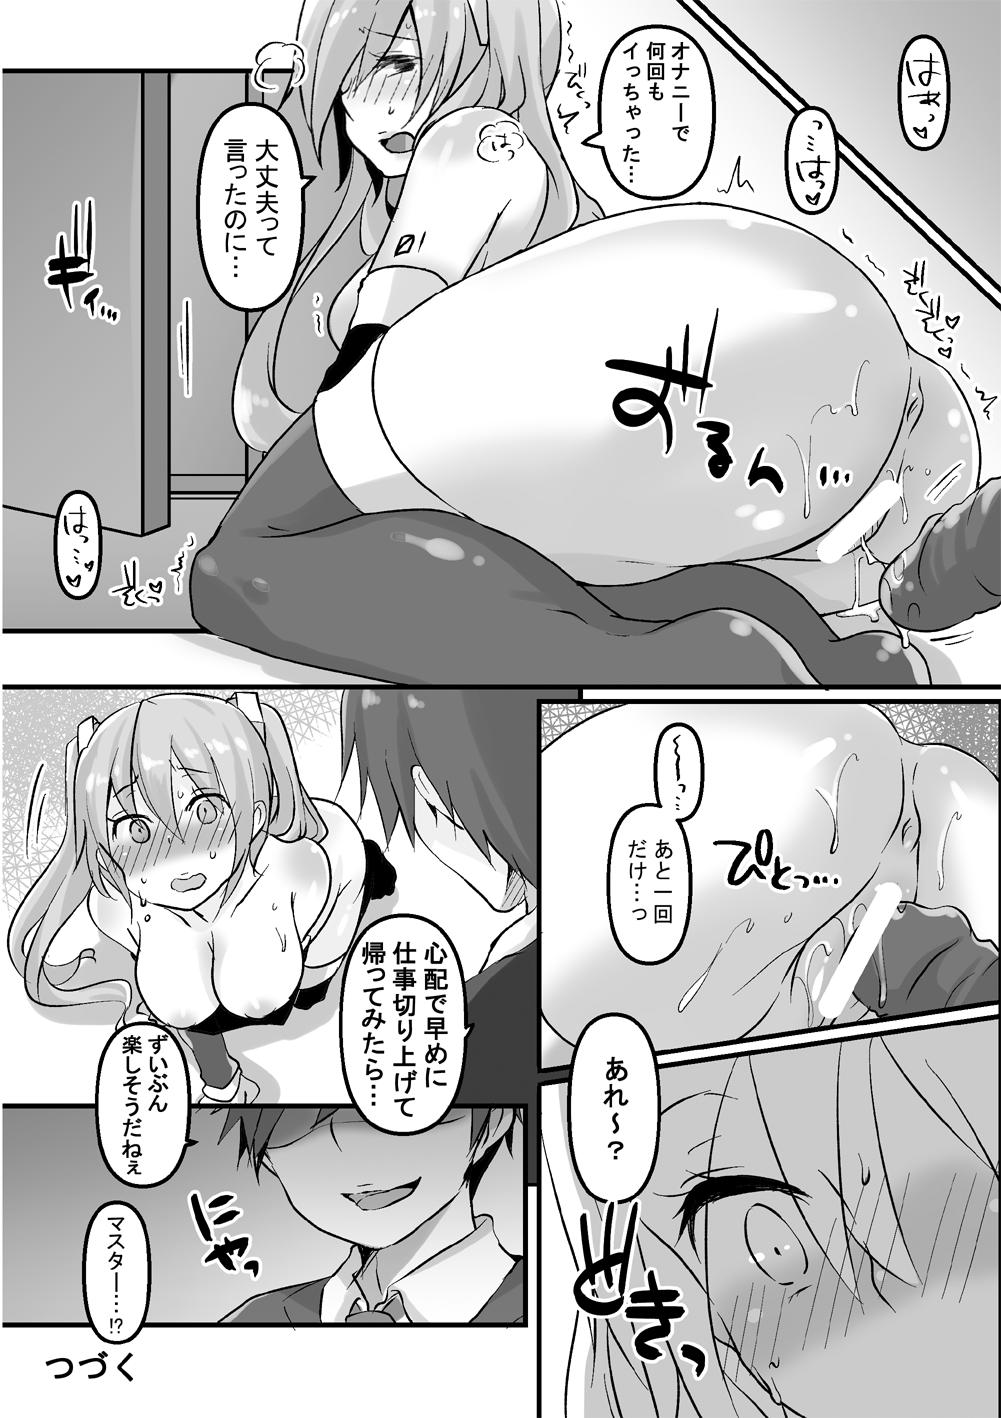 Family Taboo C96 Omakebon. - Vocaloid Pareja - Page 6